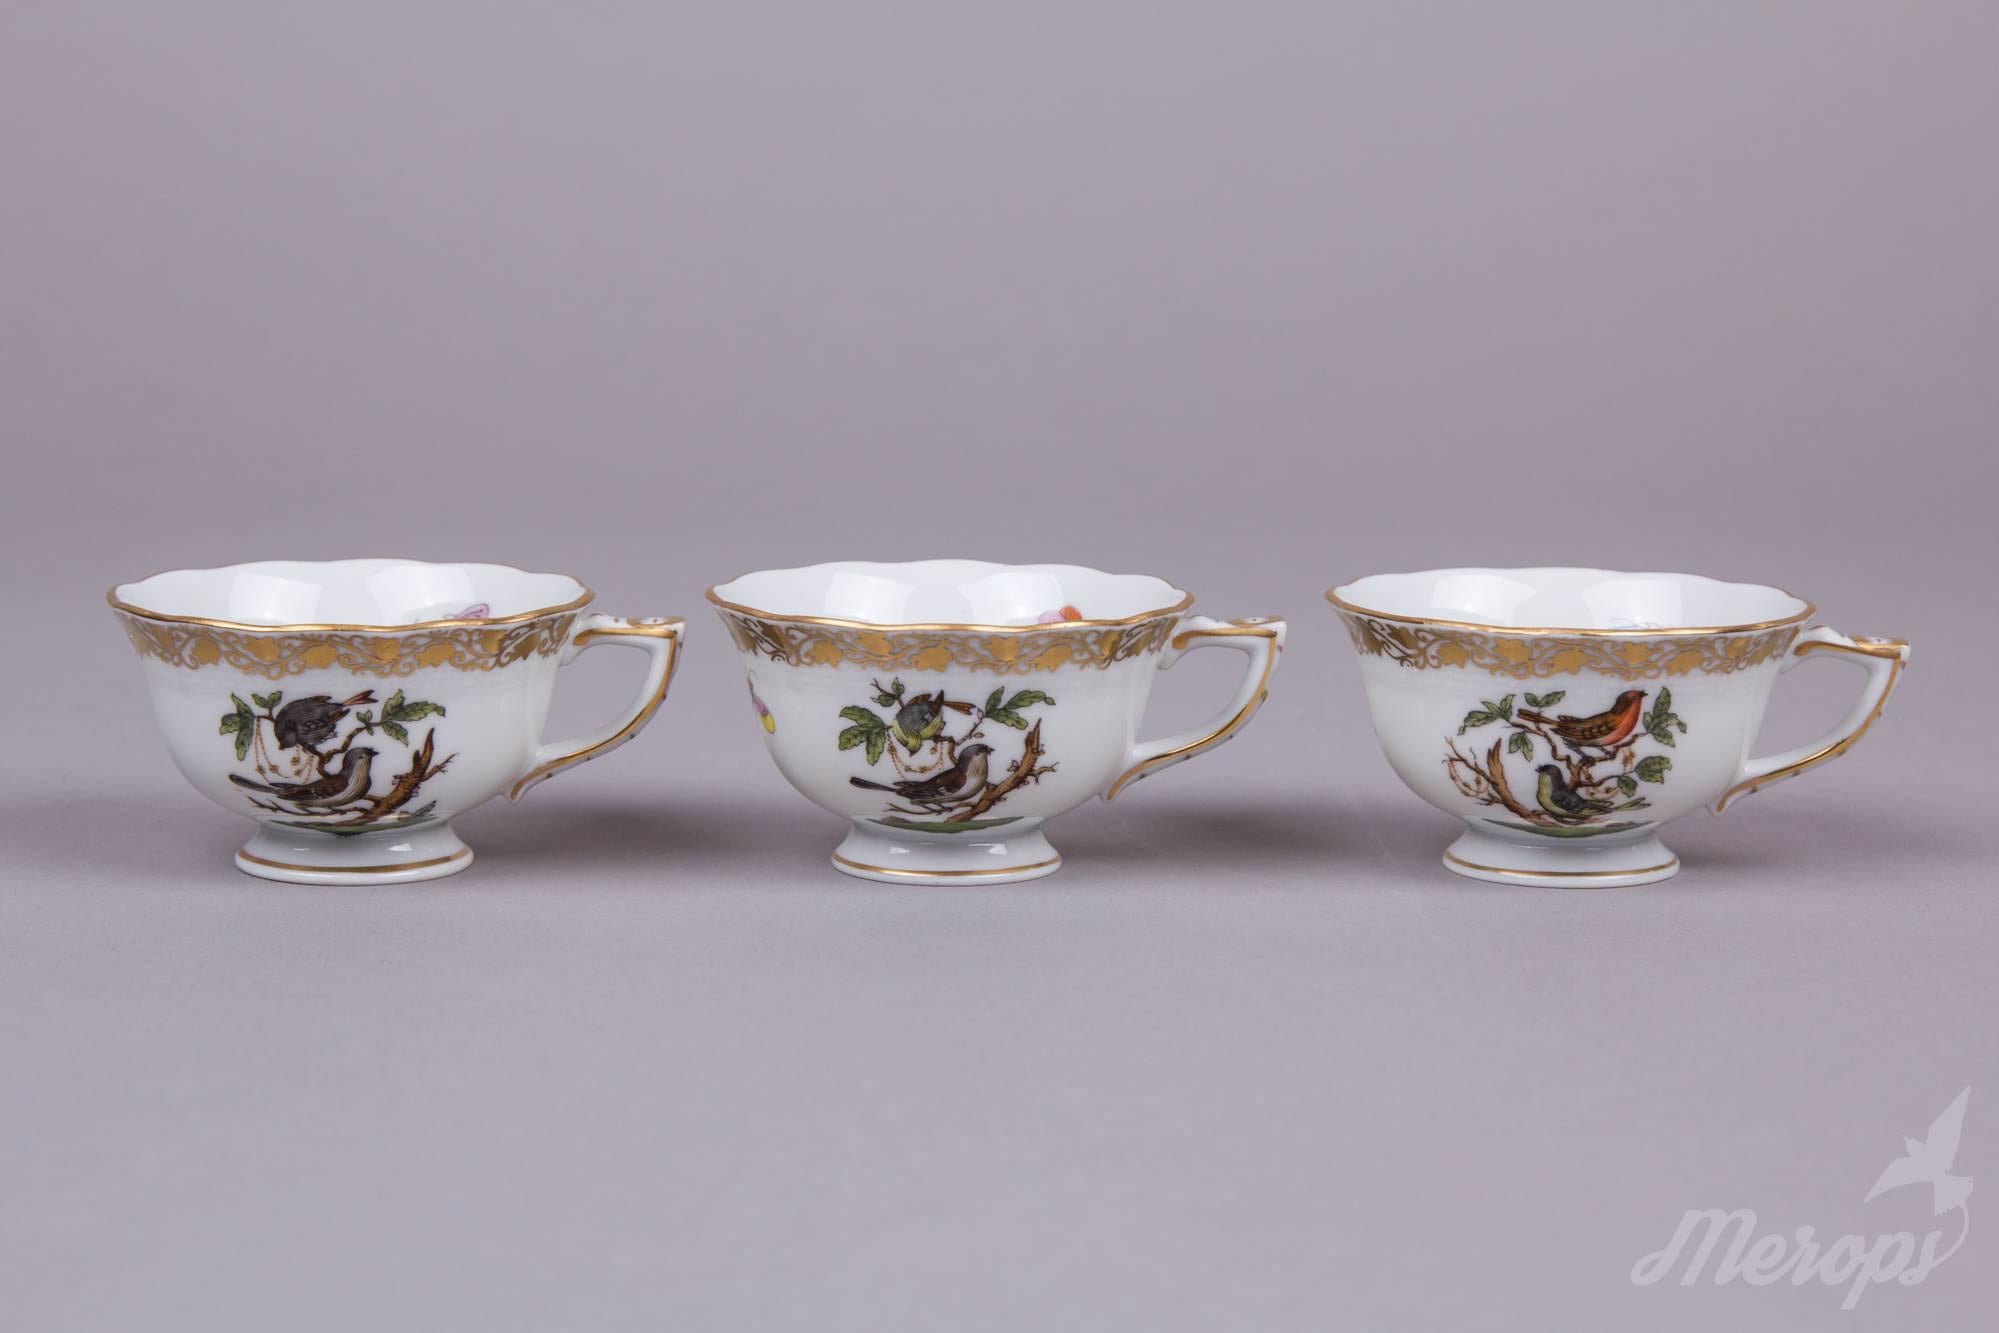 Mid-20th Century Herend Rothschild Bird Special Edition Mocha Set for Six Persons